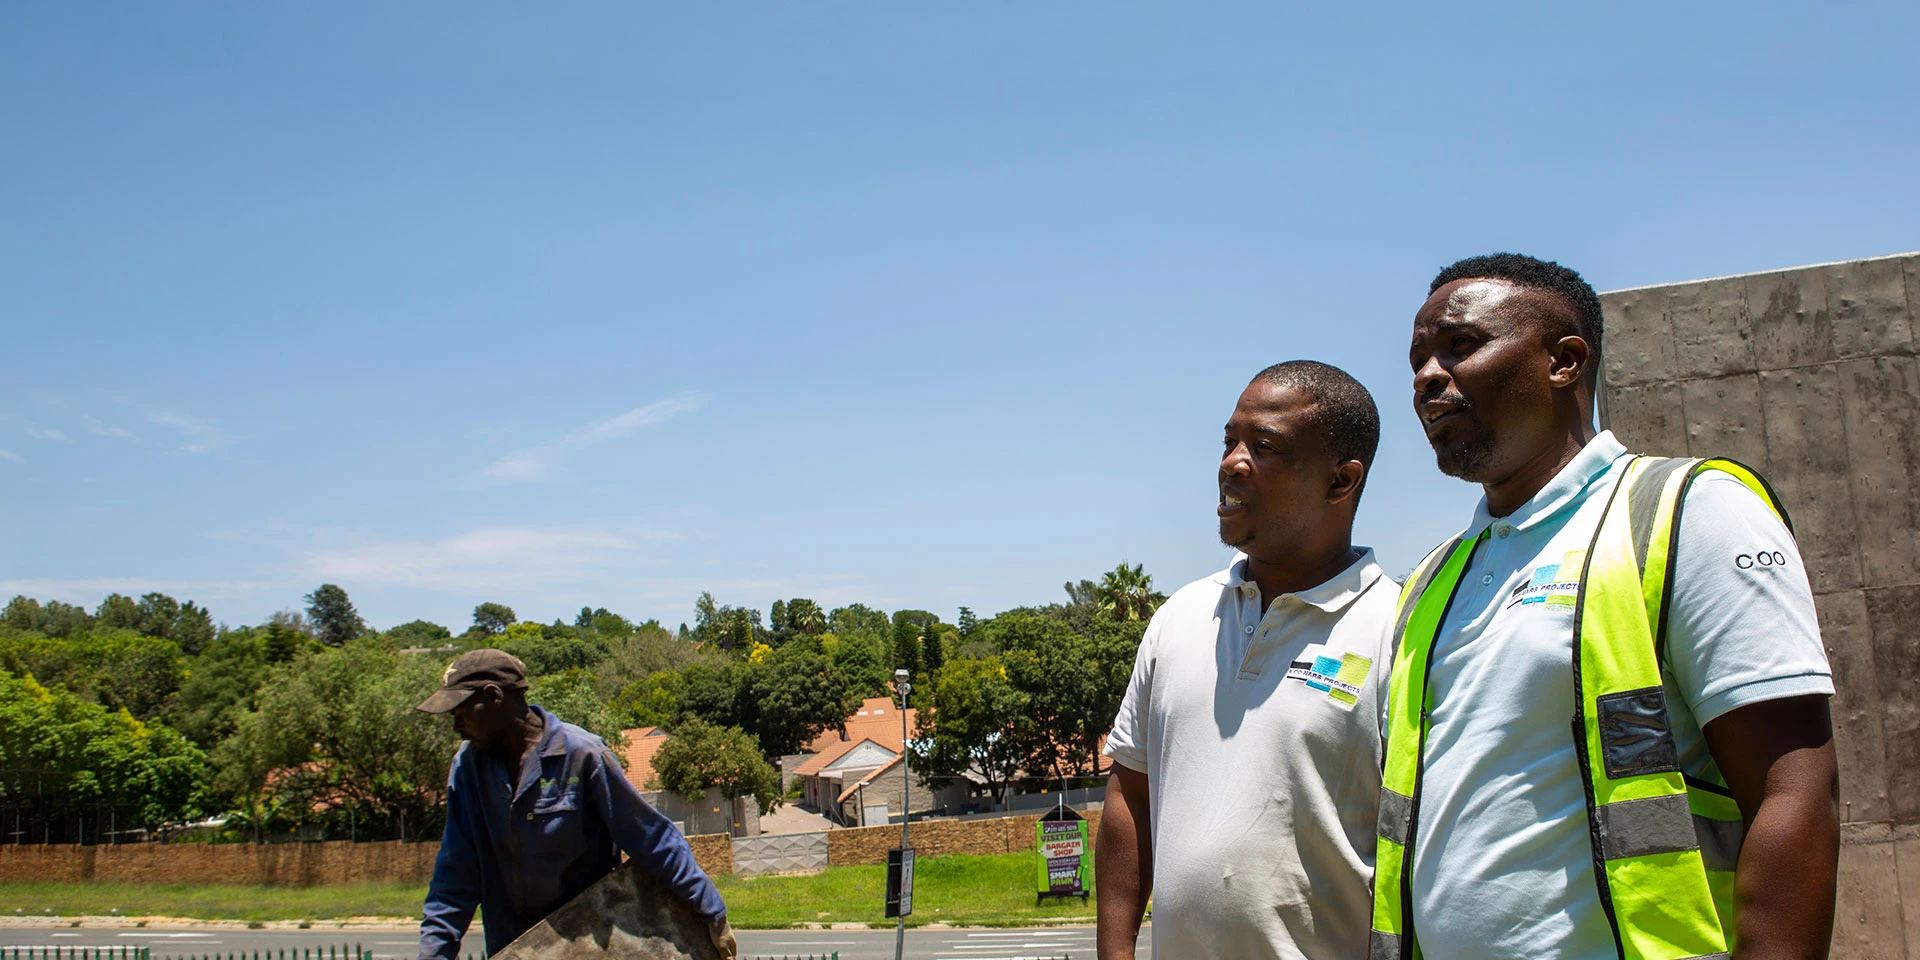 Scelo O'neil and Senzo Kevin during the construction of toilets by Eco Nars projects at a park in Sandton, Johannesburg, South Africa, Friday, 31, Jan 2020.Photo/Karel Prinsloo/IFC
